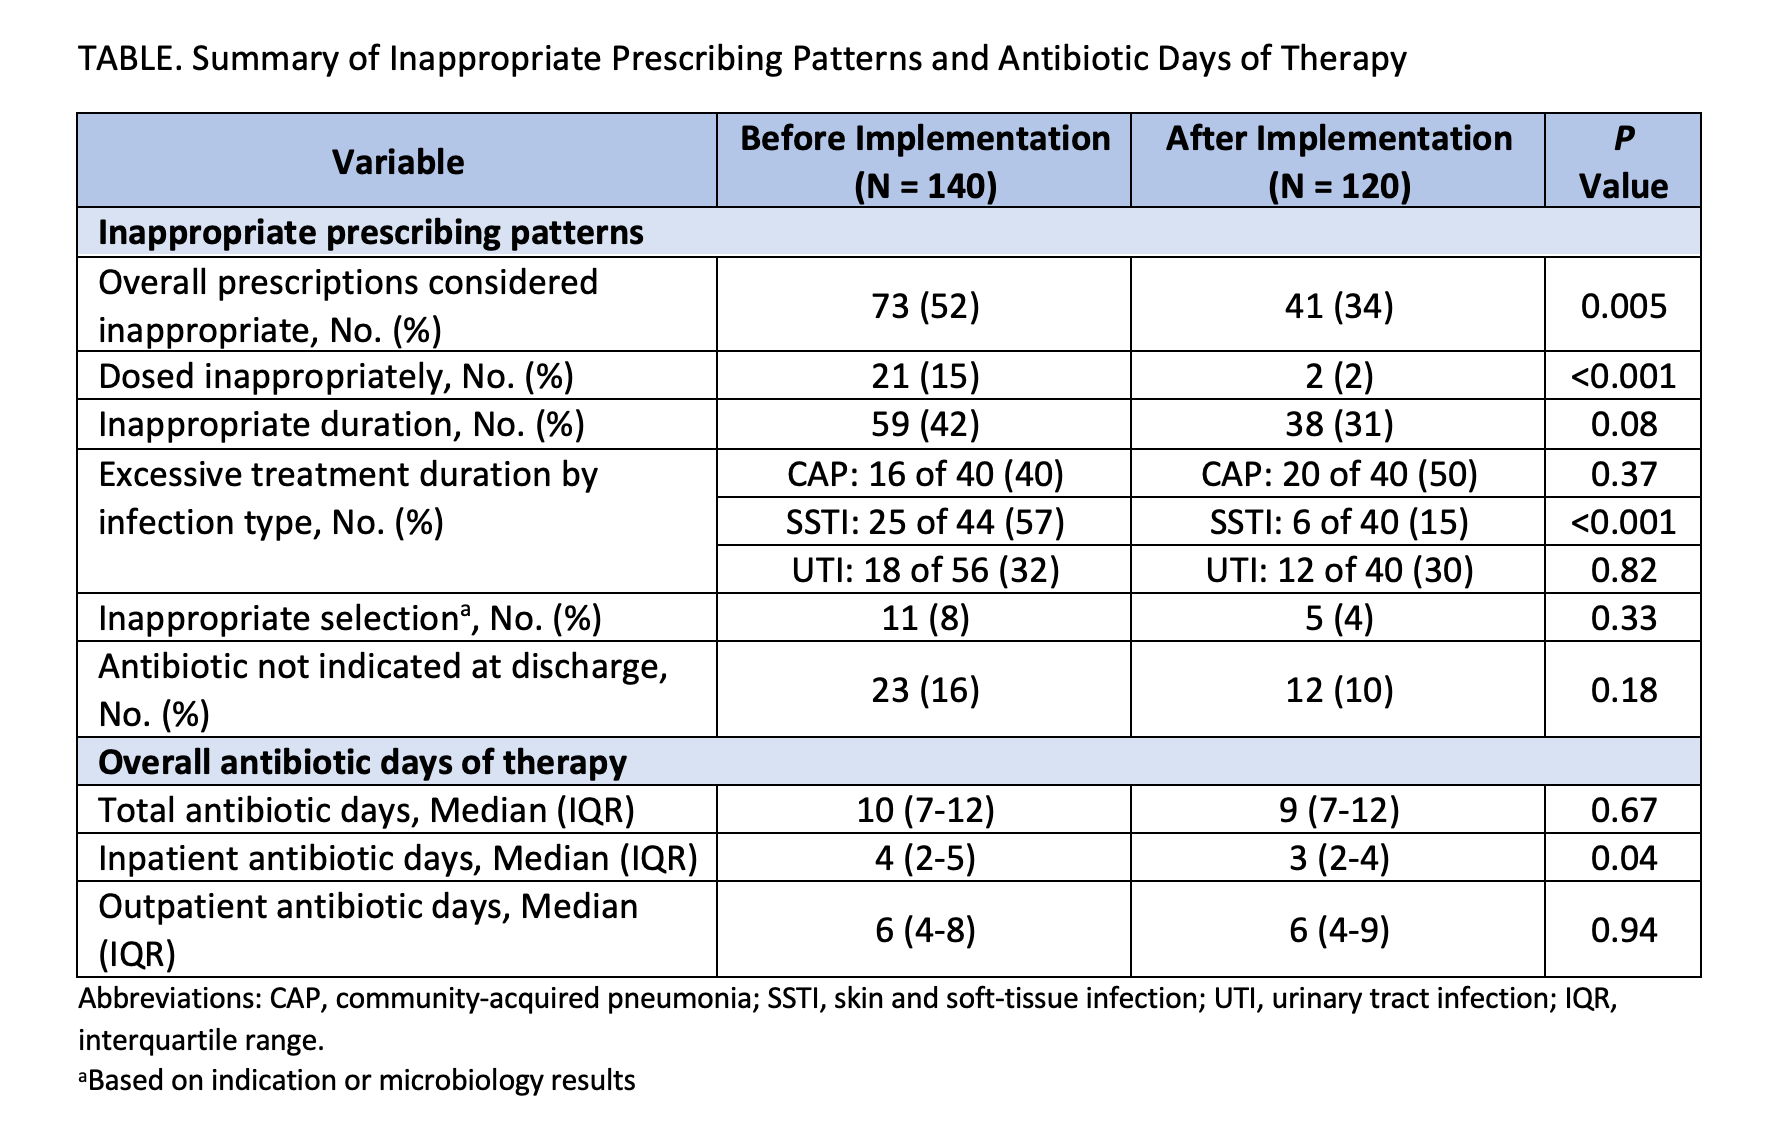 Summary of Inappropriate Prescribing Patterns and Antibiotic Days of Therapy